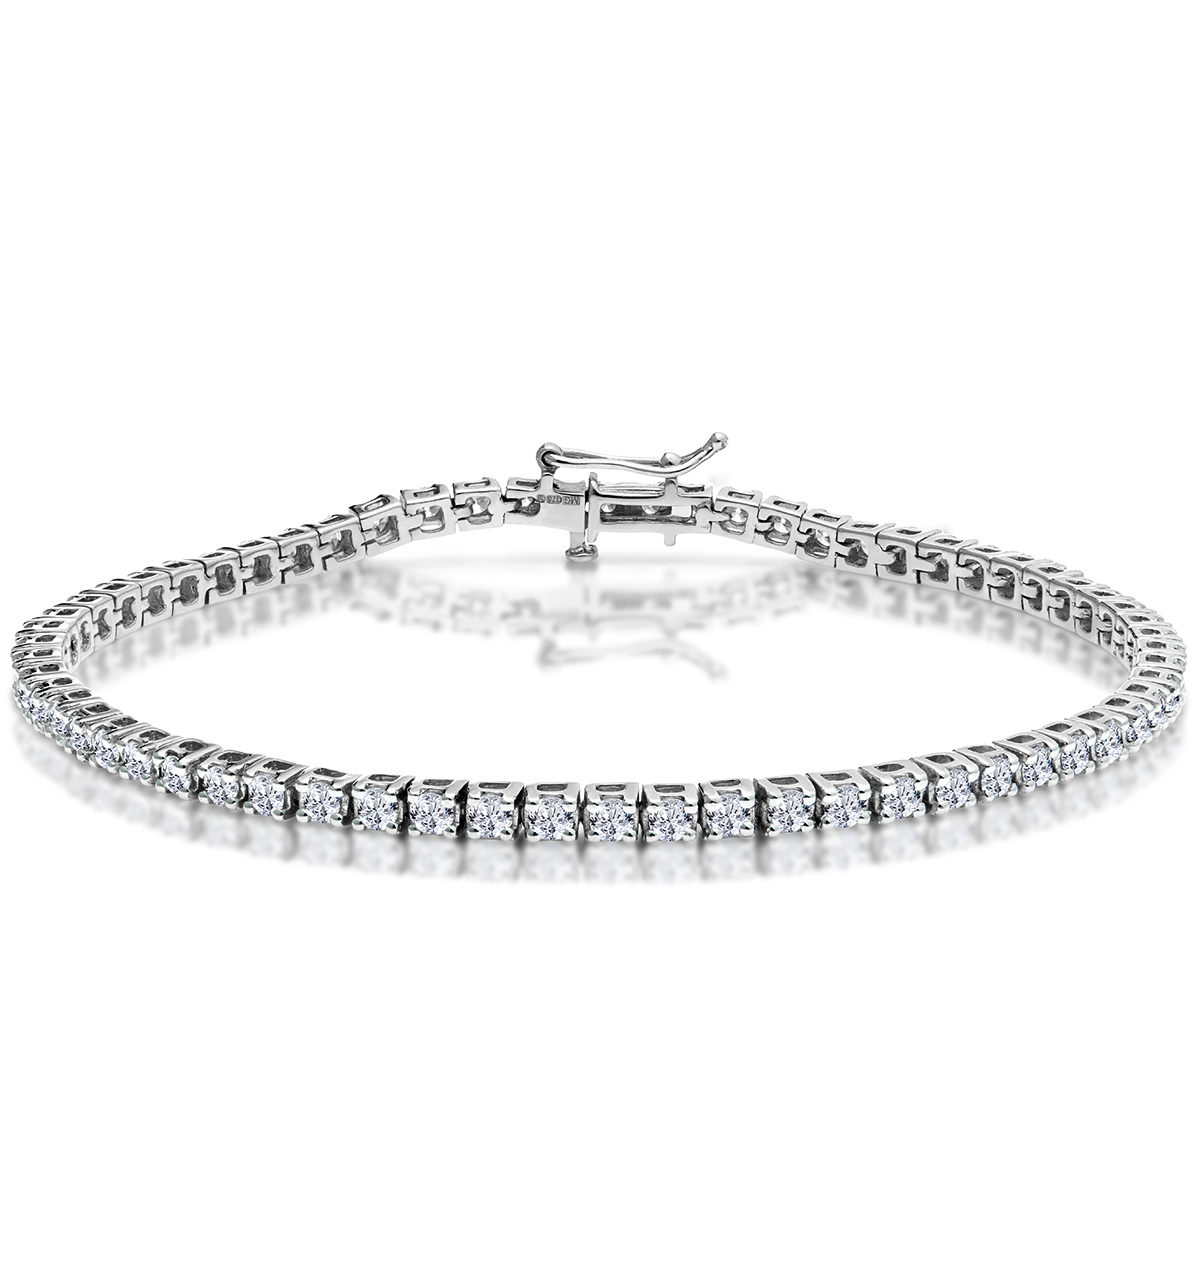 GMESME 18K White Gold Plated 3.0 Cubic Zirconia Classic Tennis Bracelet 6.5 Inch 